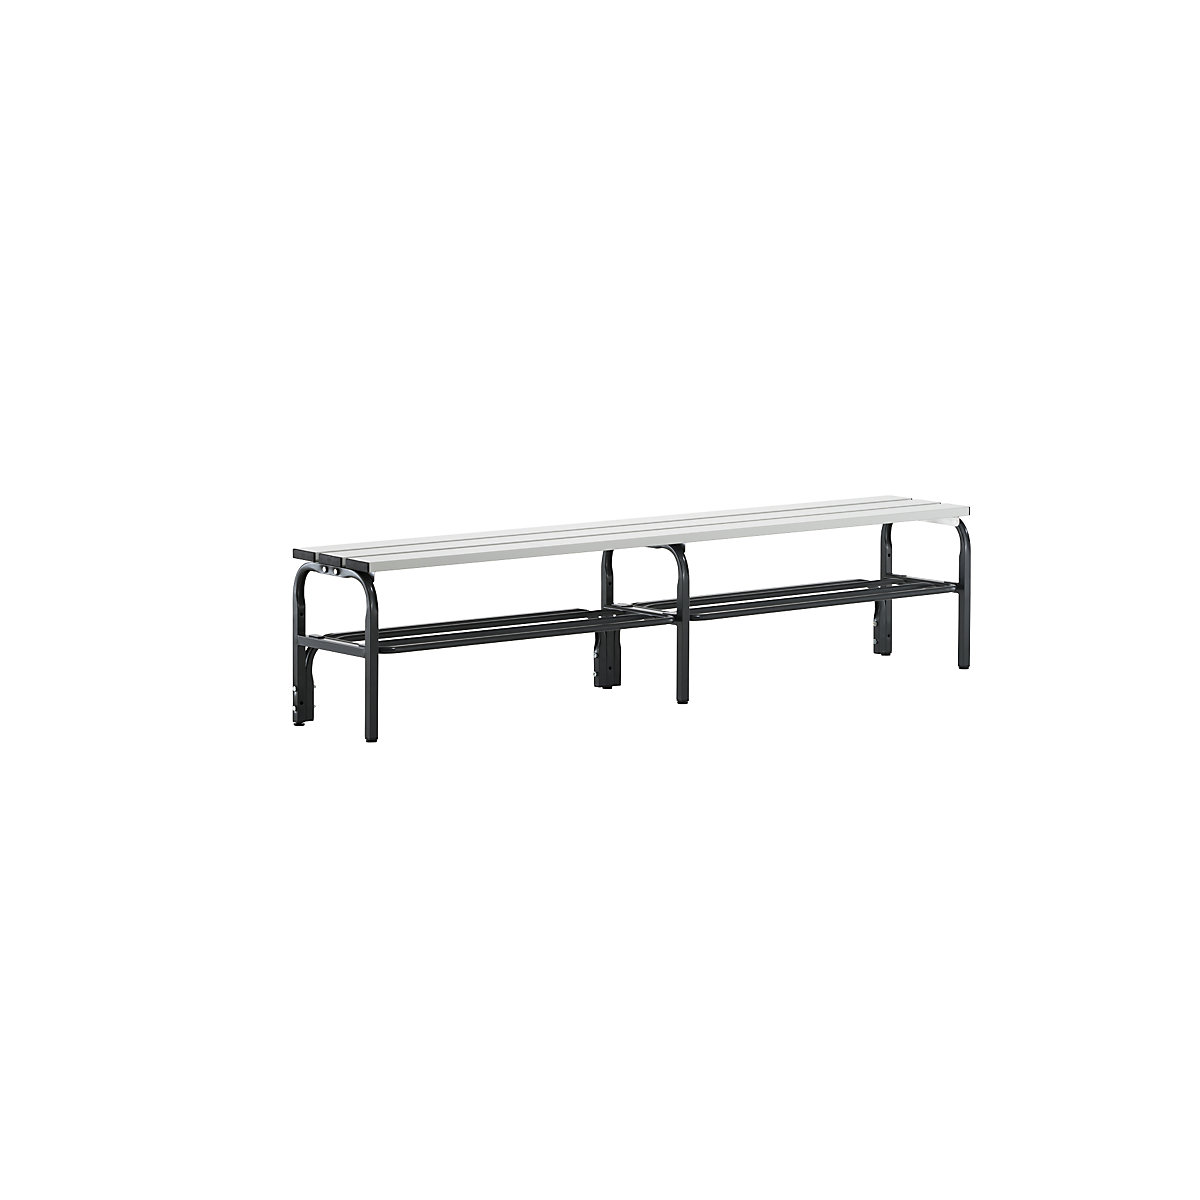 Sypro – Changing room bench made of stainless steel, HxD 450 x 350 mm, length 1500 mm, charcoal, shoe rack